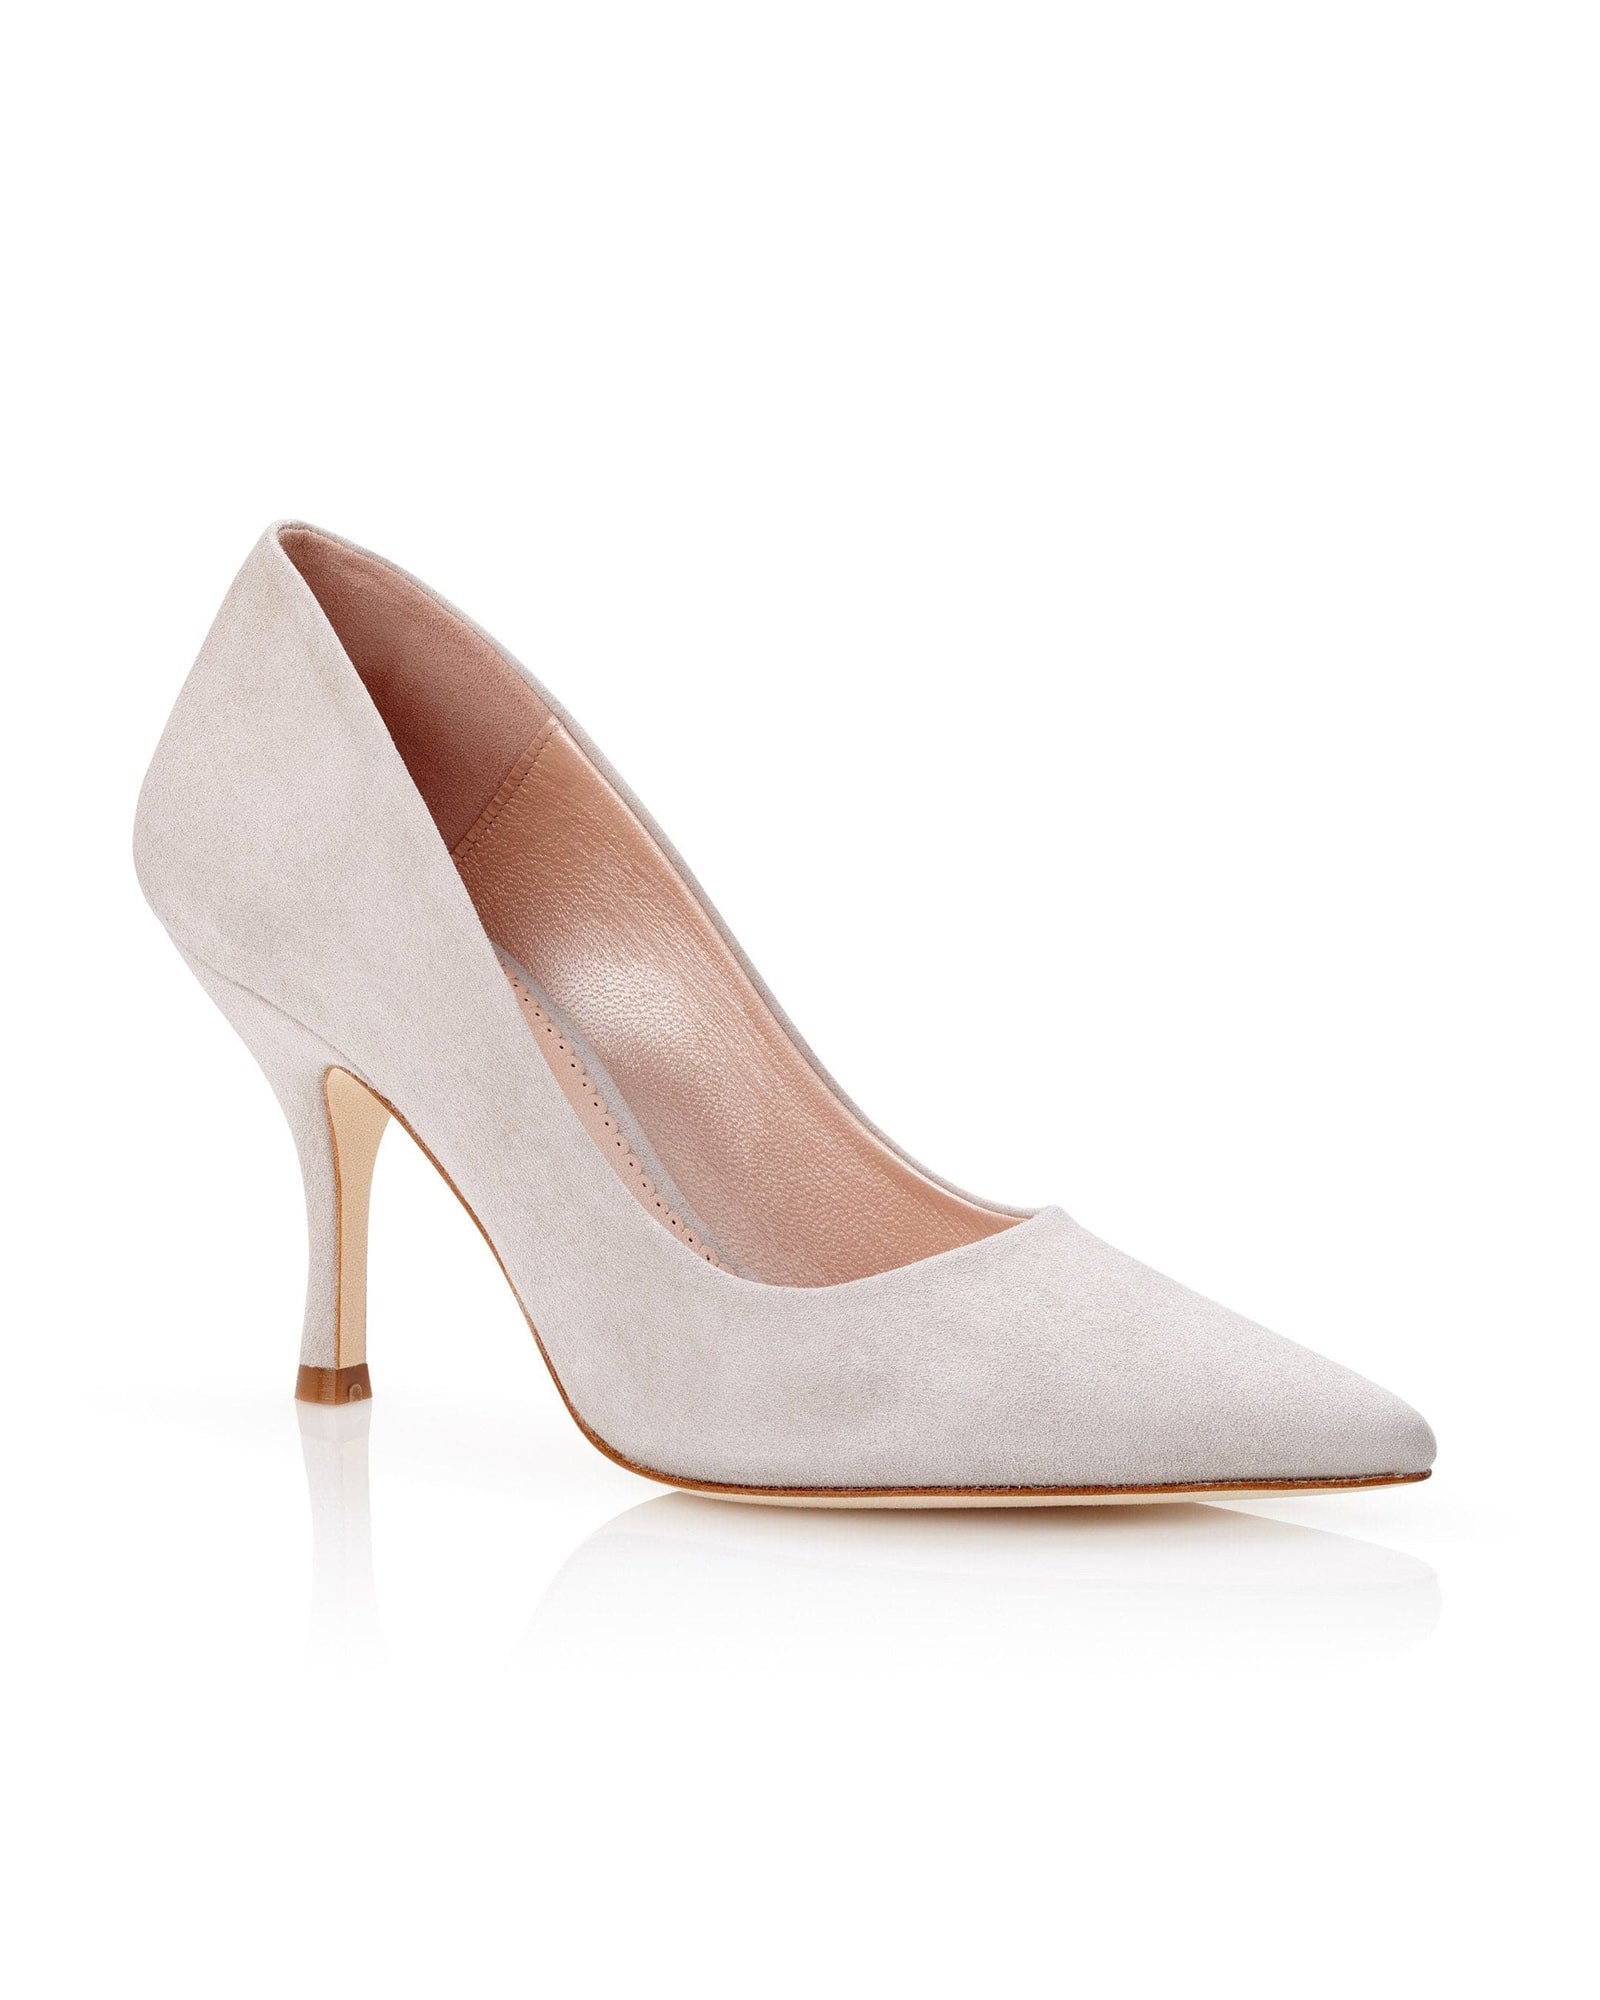 Olivia Vapour Fashion Shoe Light Grey Suede Pointed Court Shoes  image